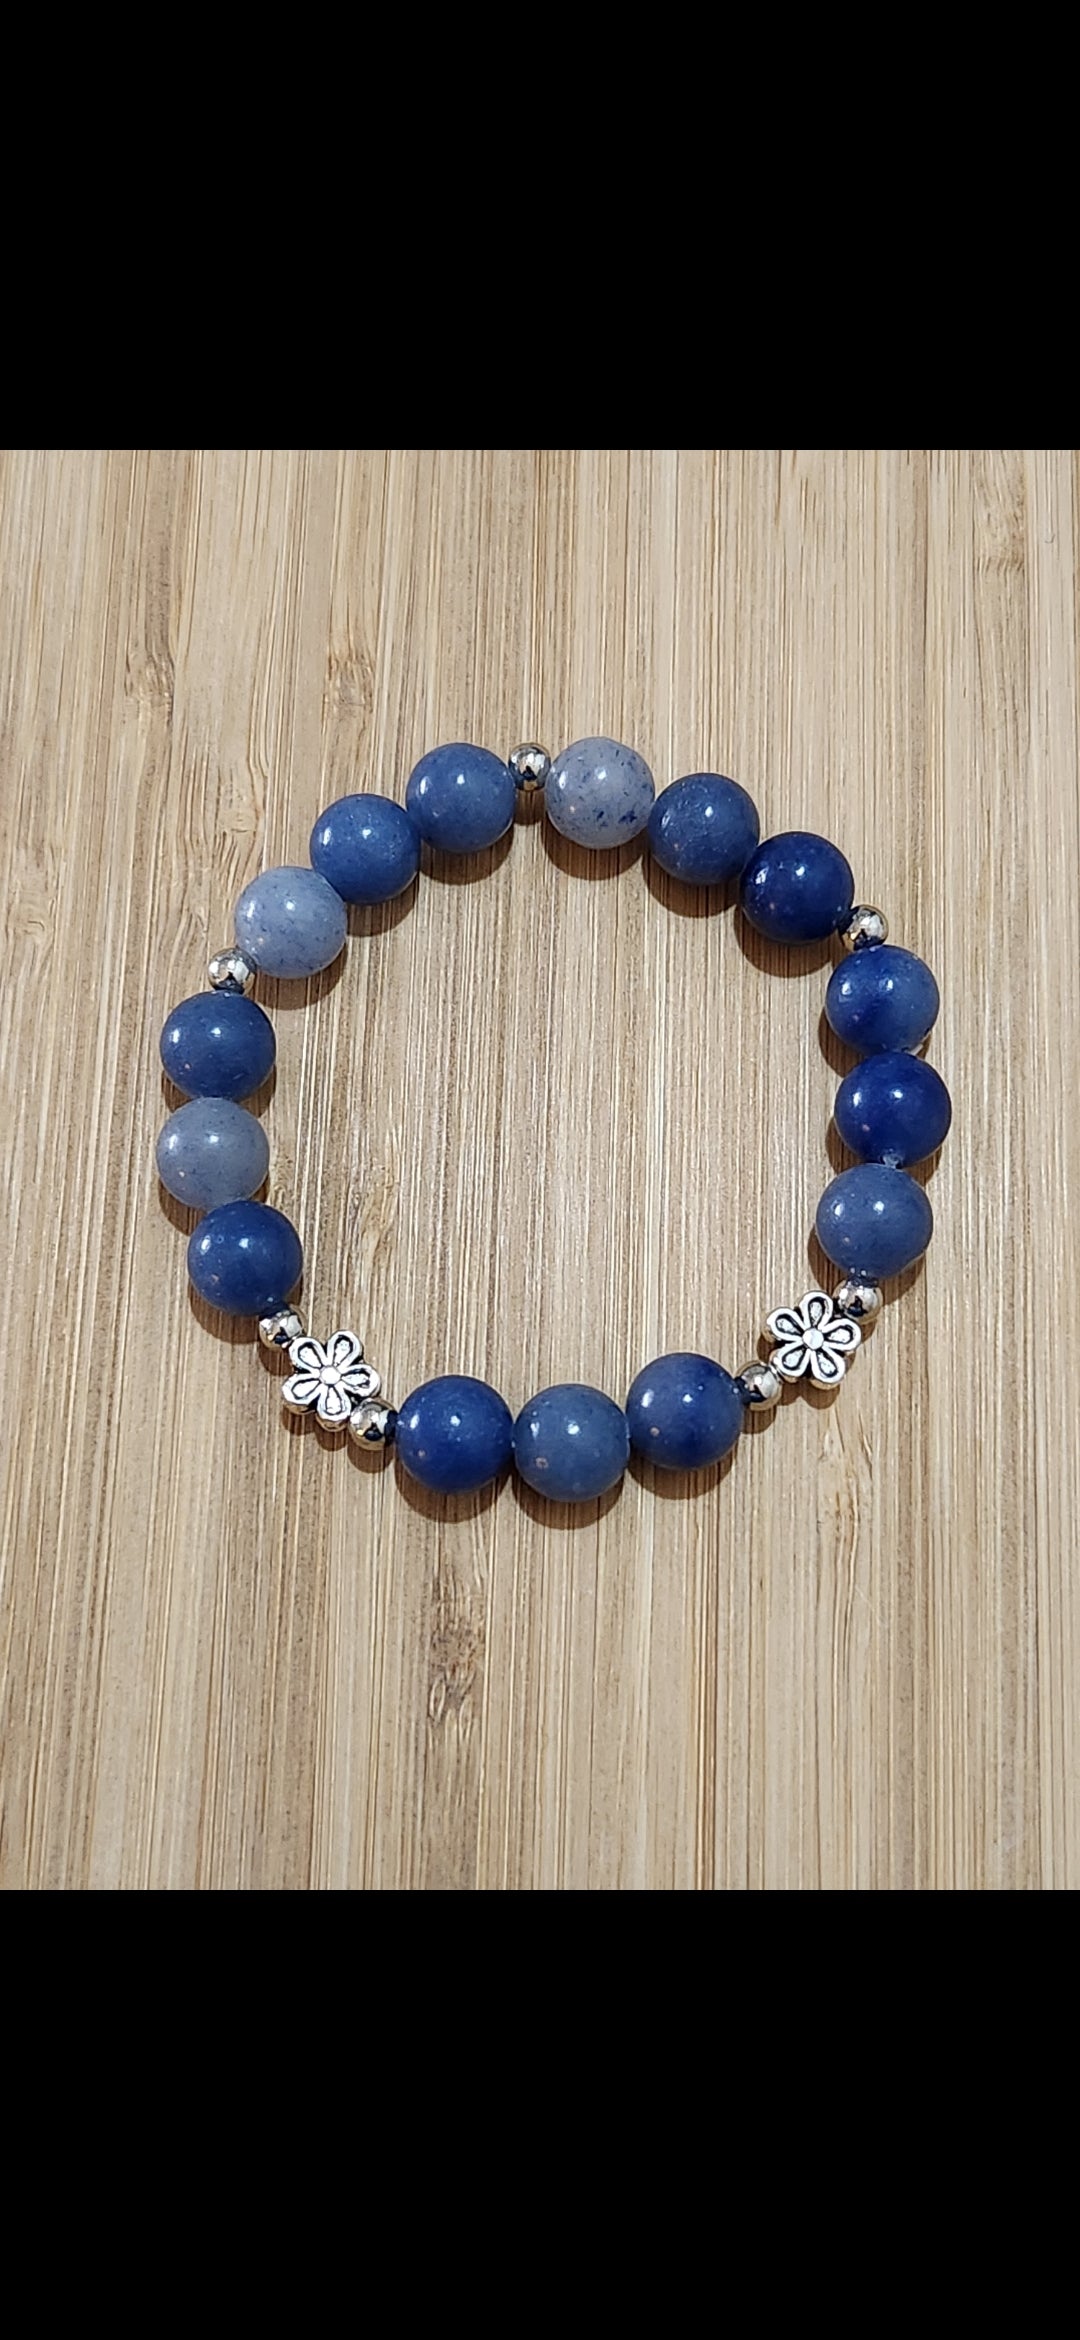 Blue Aventurine Stone beaded bracelet with silver flower accents - positivity - tranquility - communication